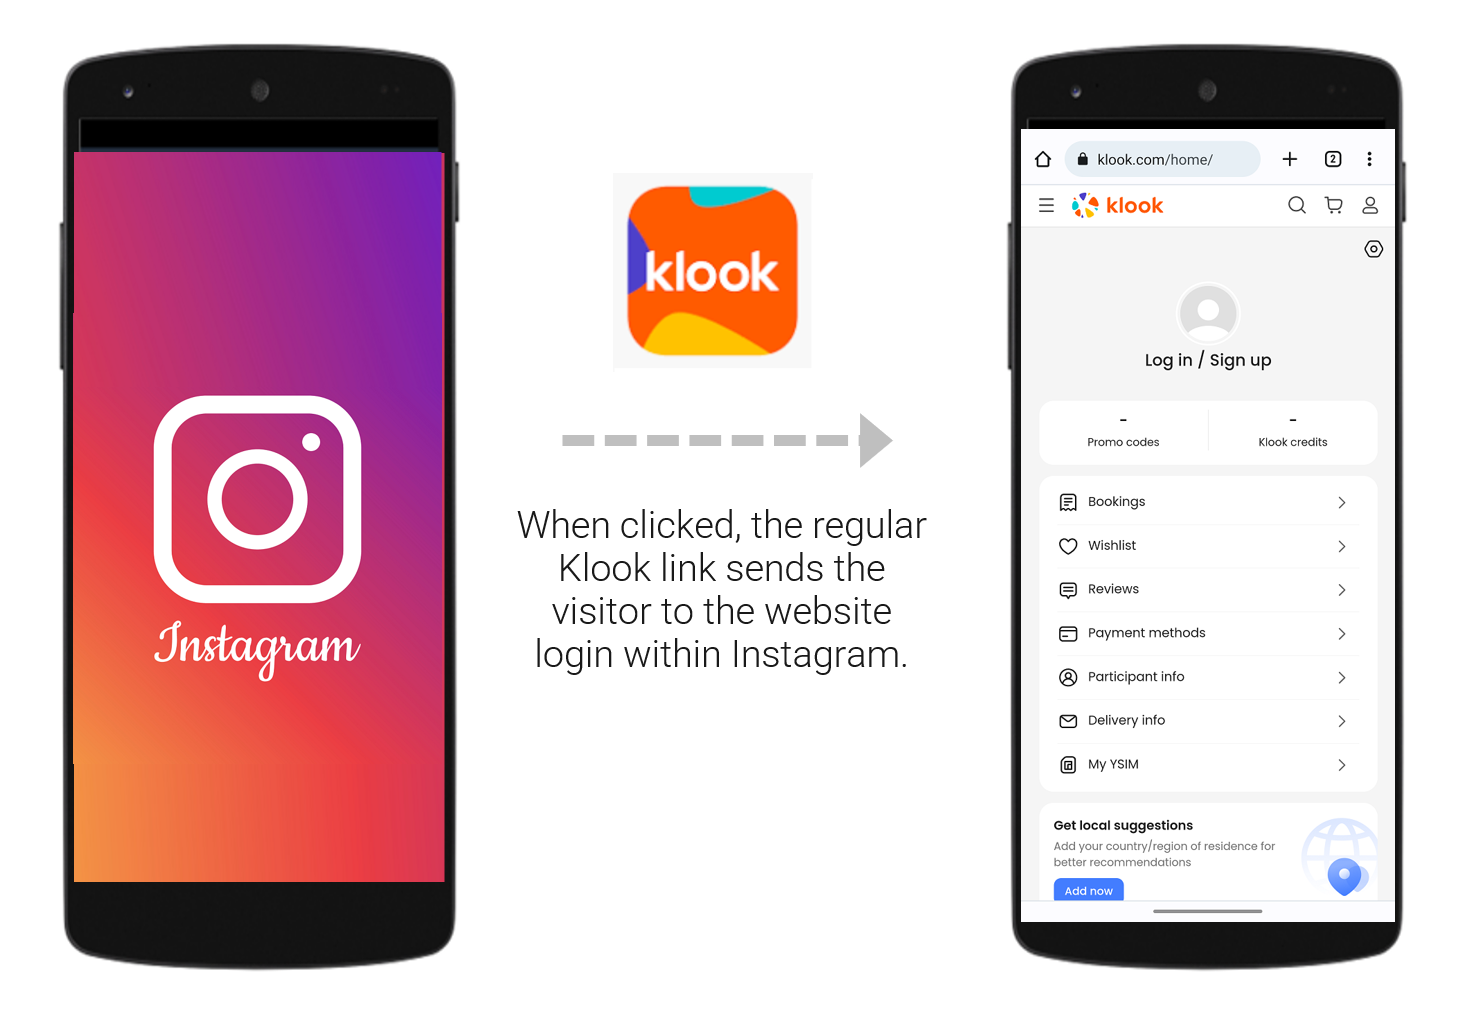 When clicked, the regular Klook link sends the visitor to the website login within Instagram 